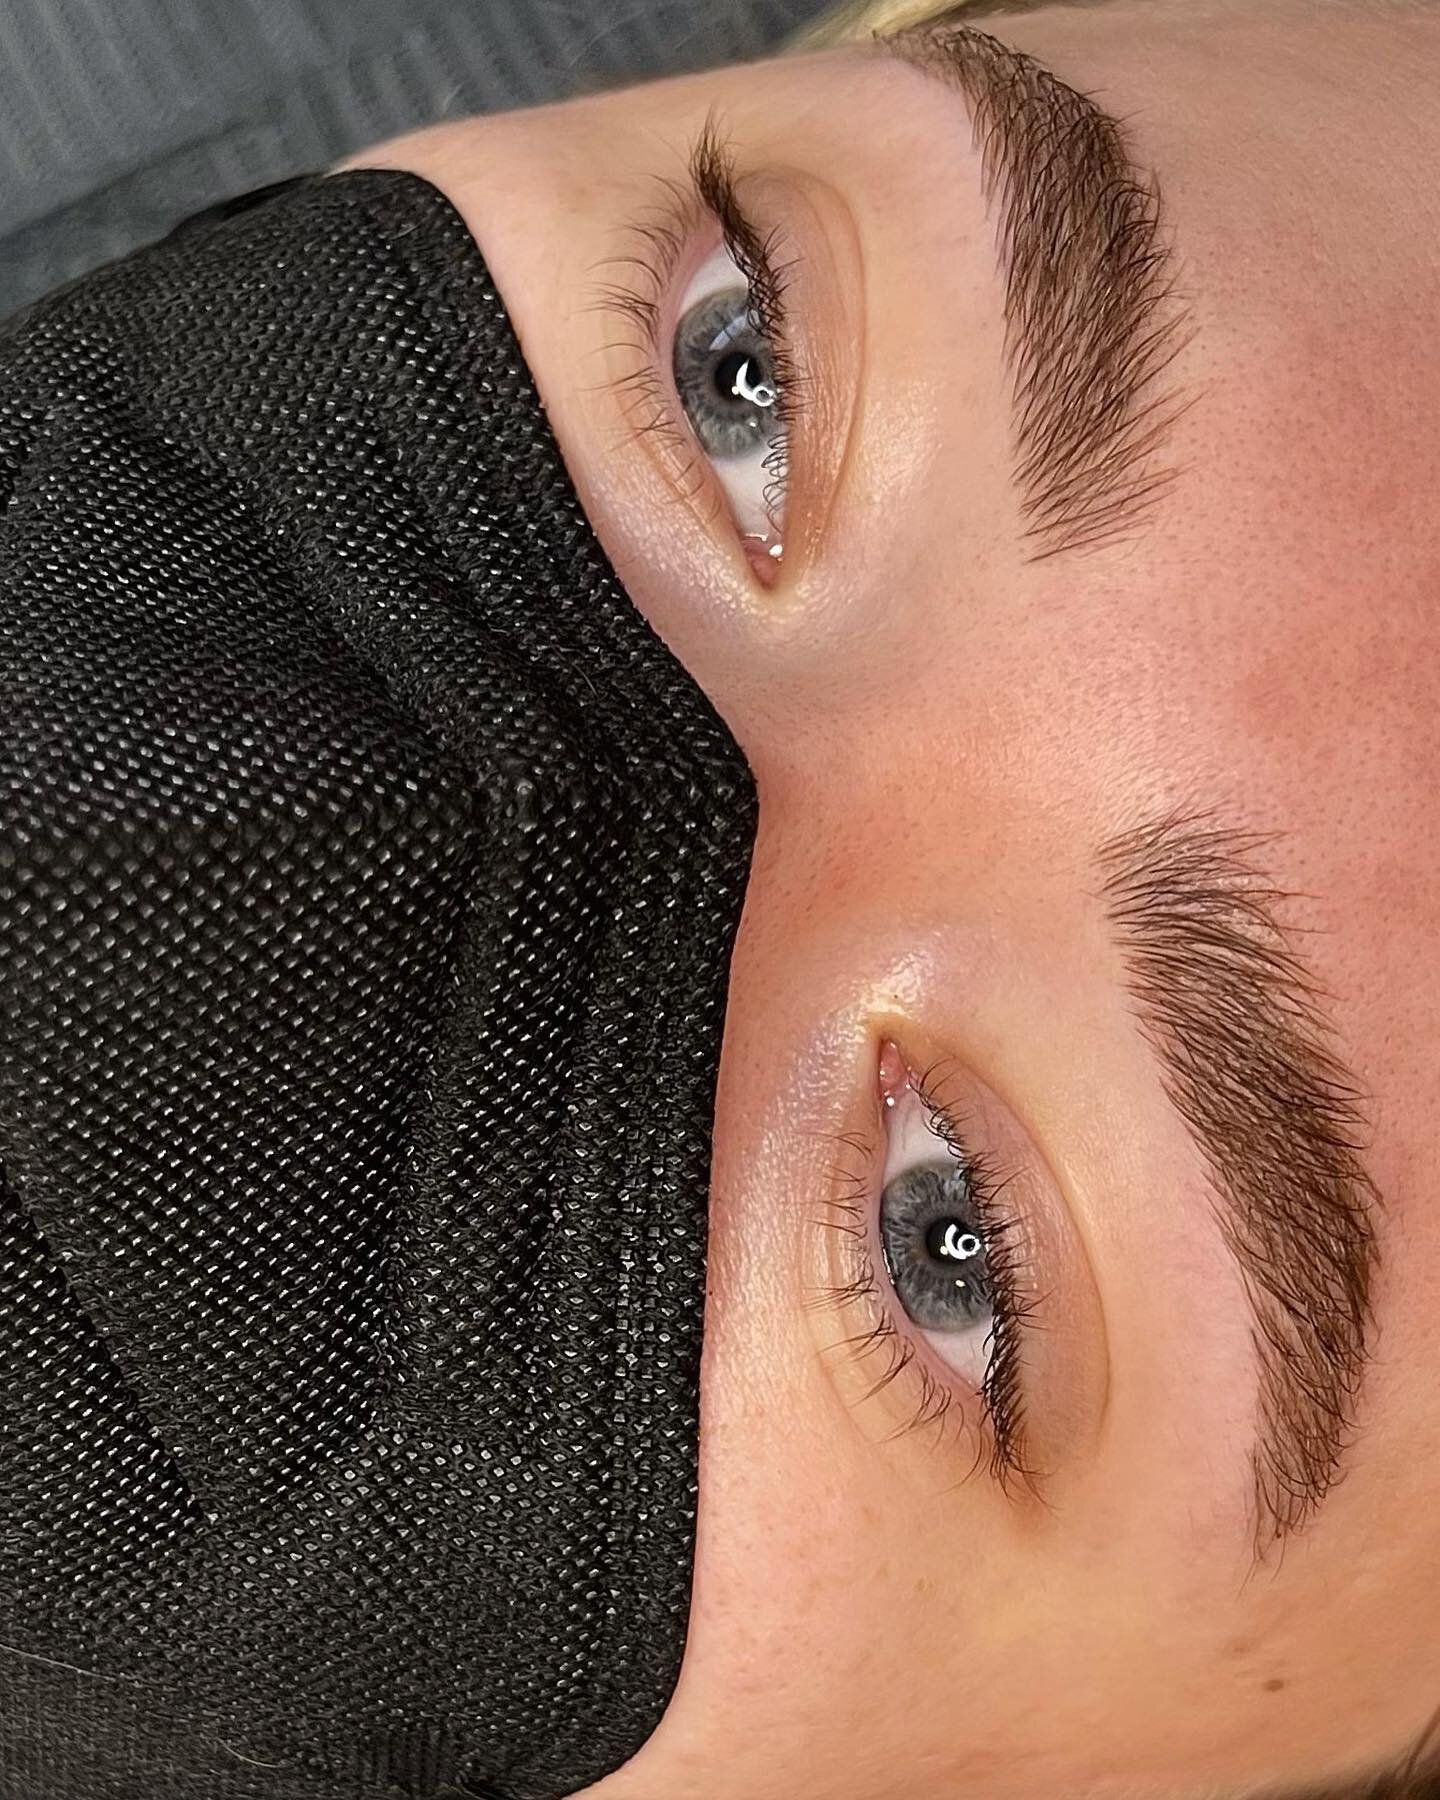 Fluffy Brows?? Yes please!
.
.
#ashevillemicroblading #knoxvillemicroblading #johnsoncitymicroblading #johnsoncitylashes #johnsoncityhairstylist #ashevillehair #ashevilletattoo #johnsoncitytn #johnsoncitytattoo #knoxvilletattoo #knoxvillelashes #knox